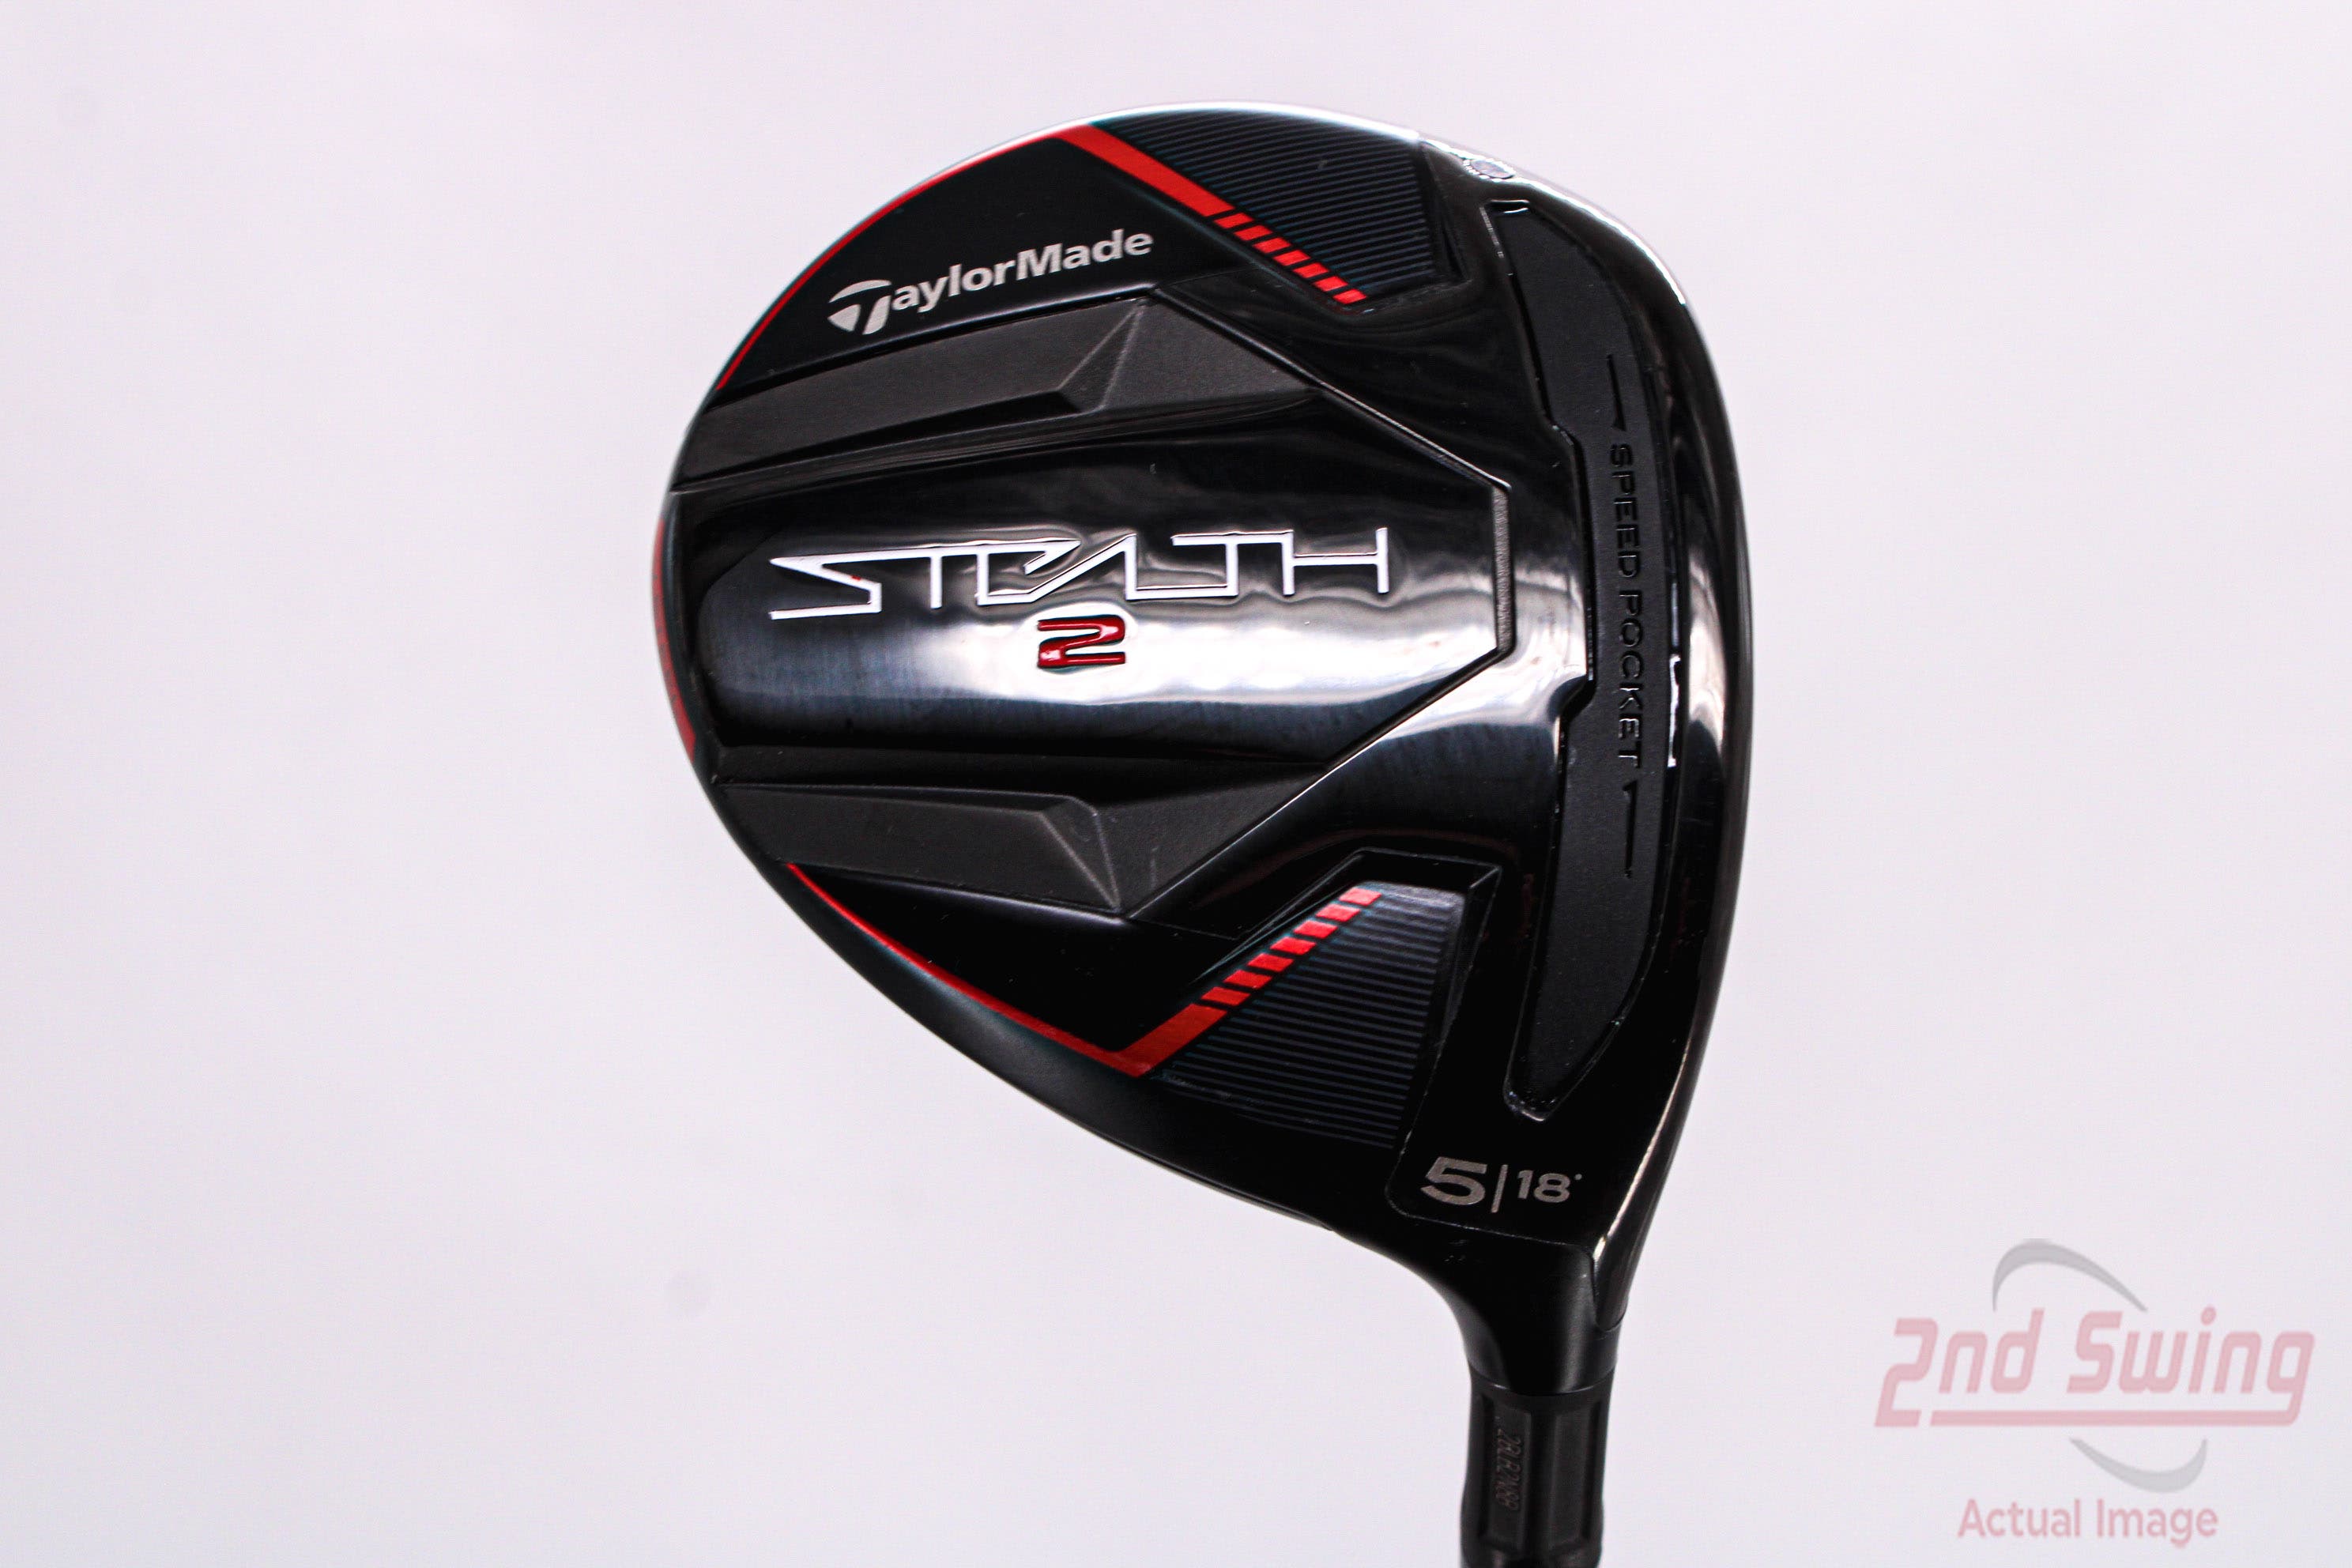 TaylorMade Stealth 2 Fairway Wood (D-22329068022) | 2nd Swing Golf